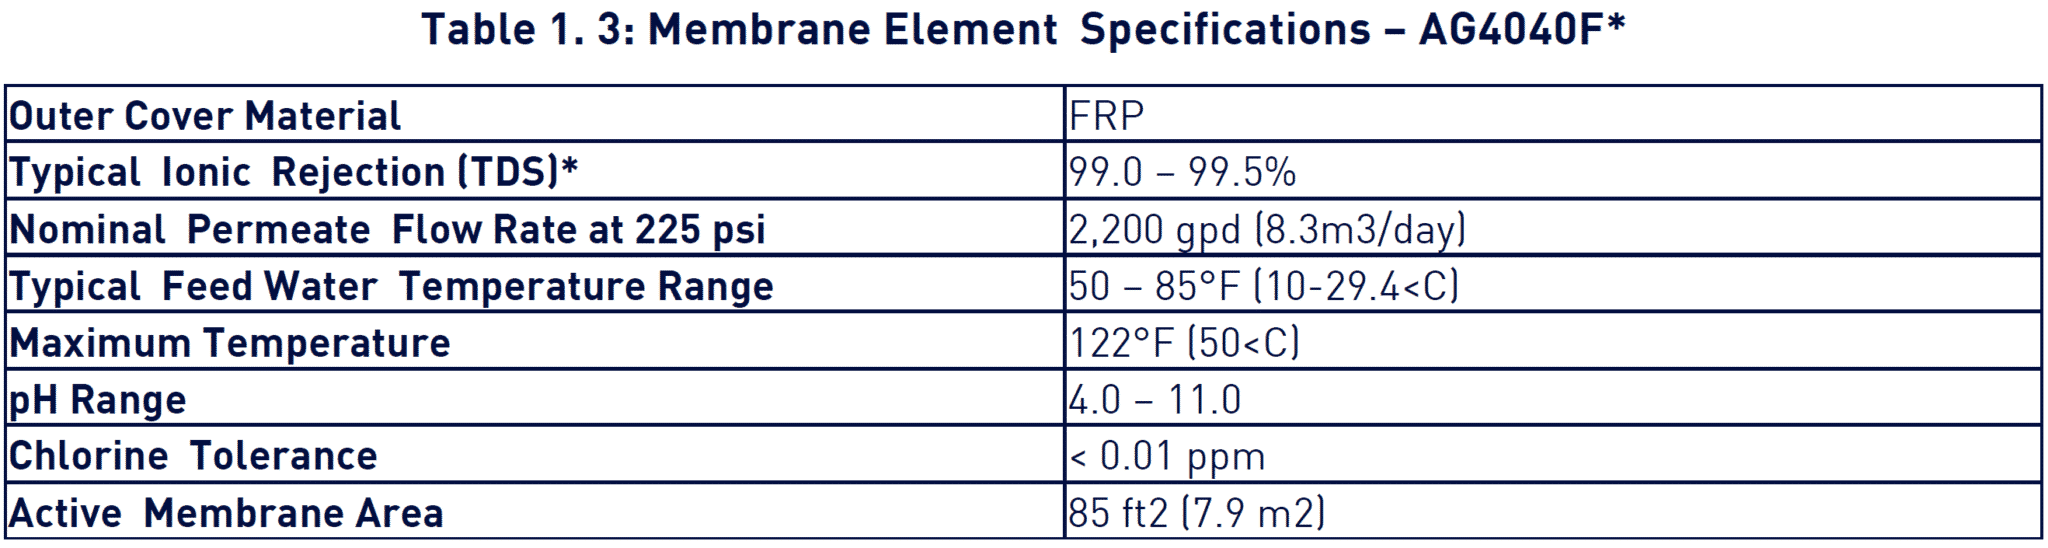 table 1.3 membrane element specifications ag4040f